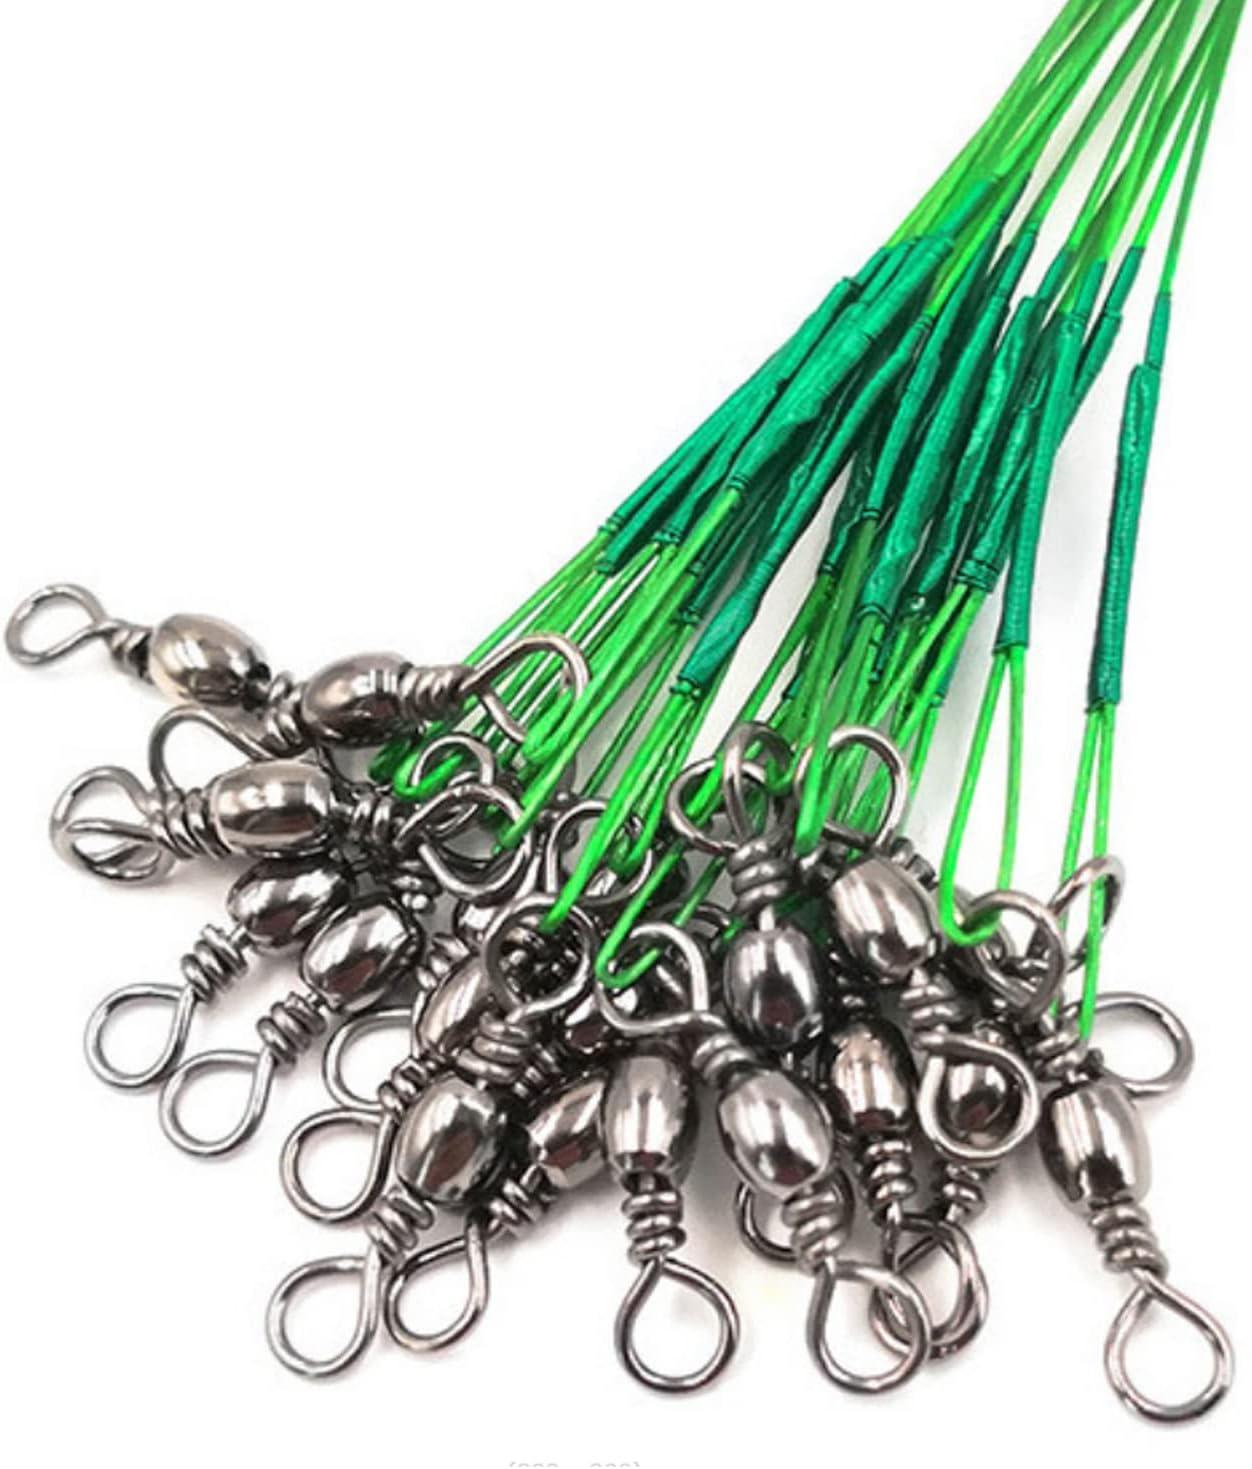 MOBOREST 60PCS Fishing Leaders, Hi-Low Rig Fish Line Stainless Steel Wire  Leader with Swivel Snap Assortment Fishing Gear Connect for Lures Bait Rig  Hooks